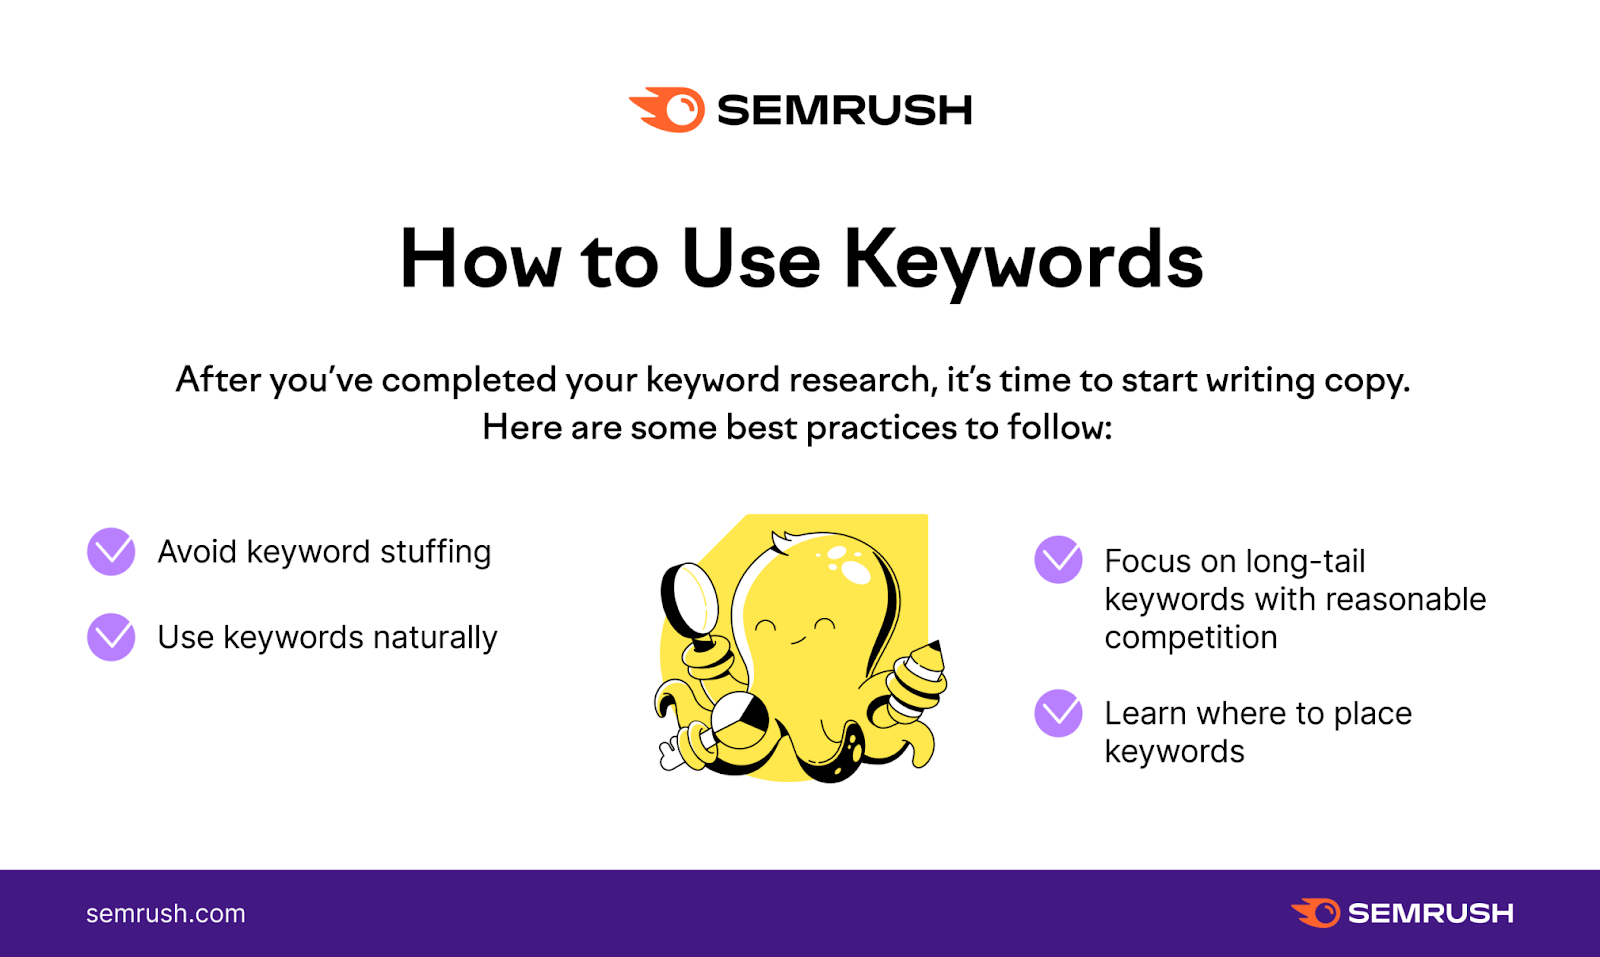 An infographic from SEMRUSH detailing how to use keywords for your content. 